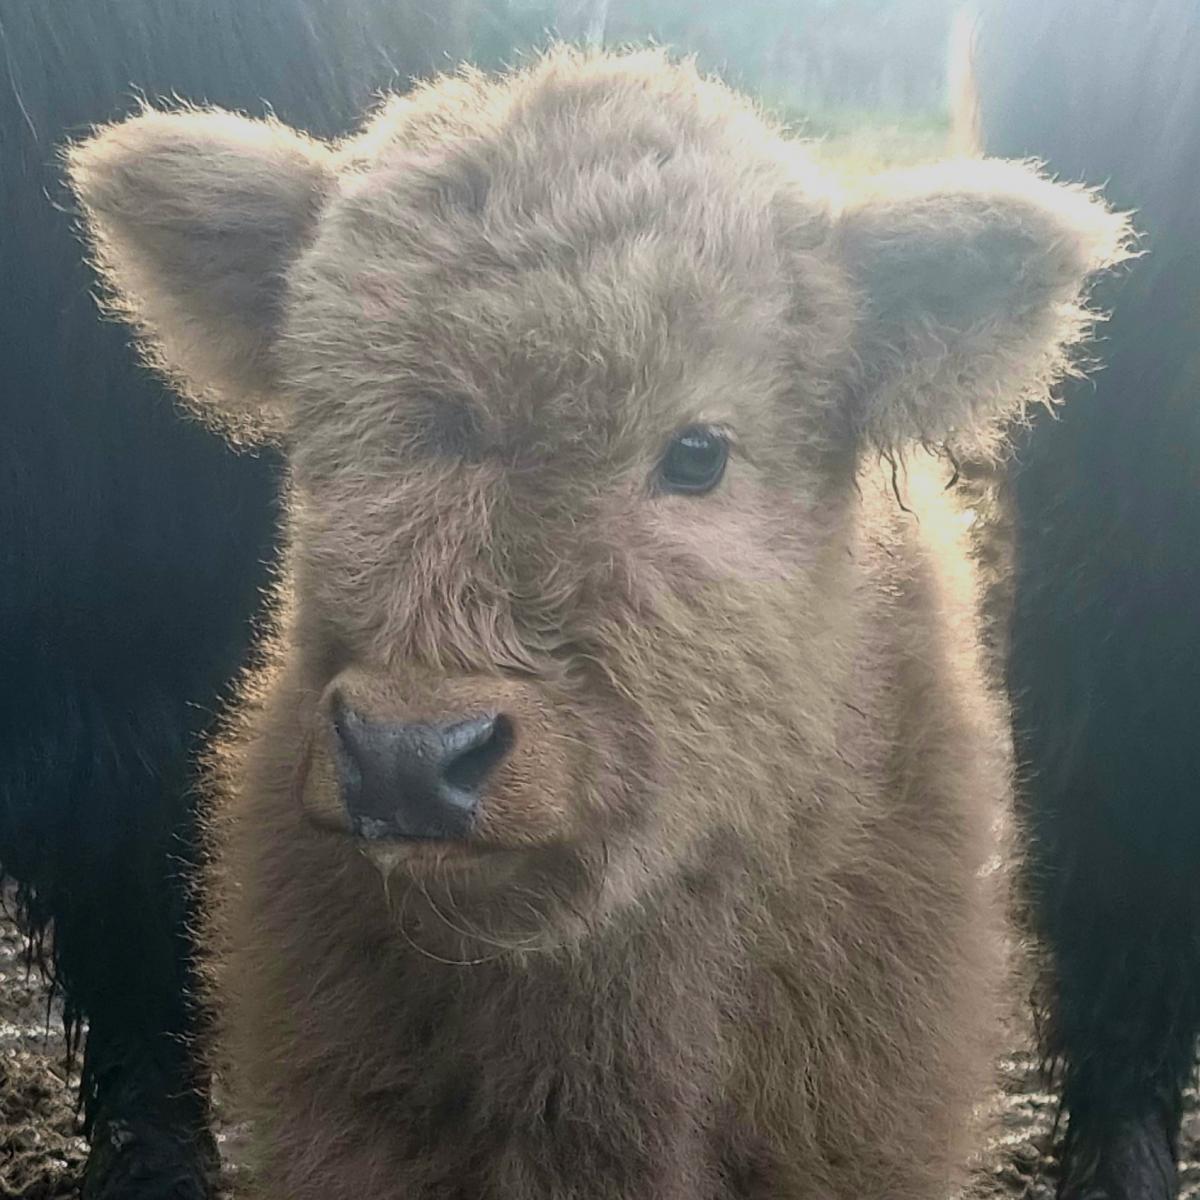 Lisa Brown - Teddy...The Highland Cow Calf in the mud